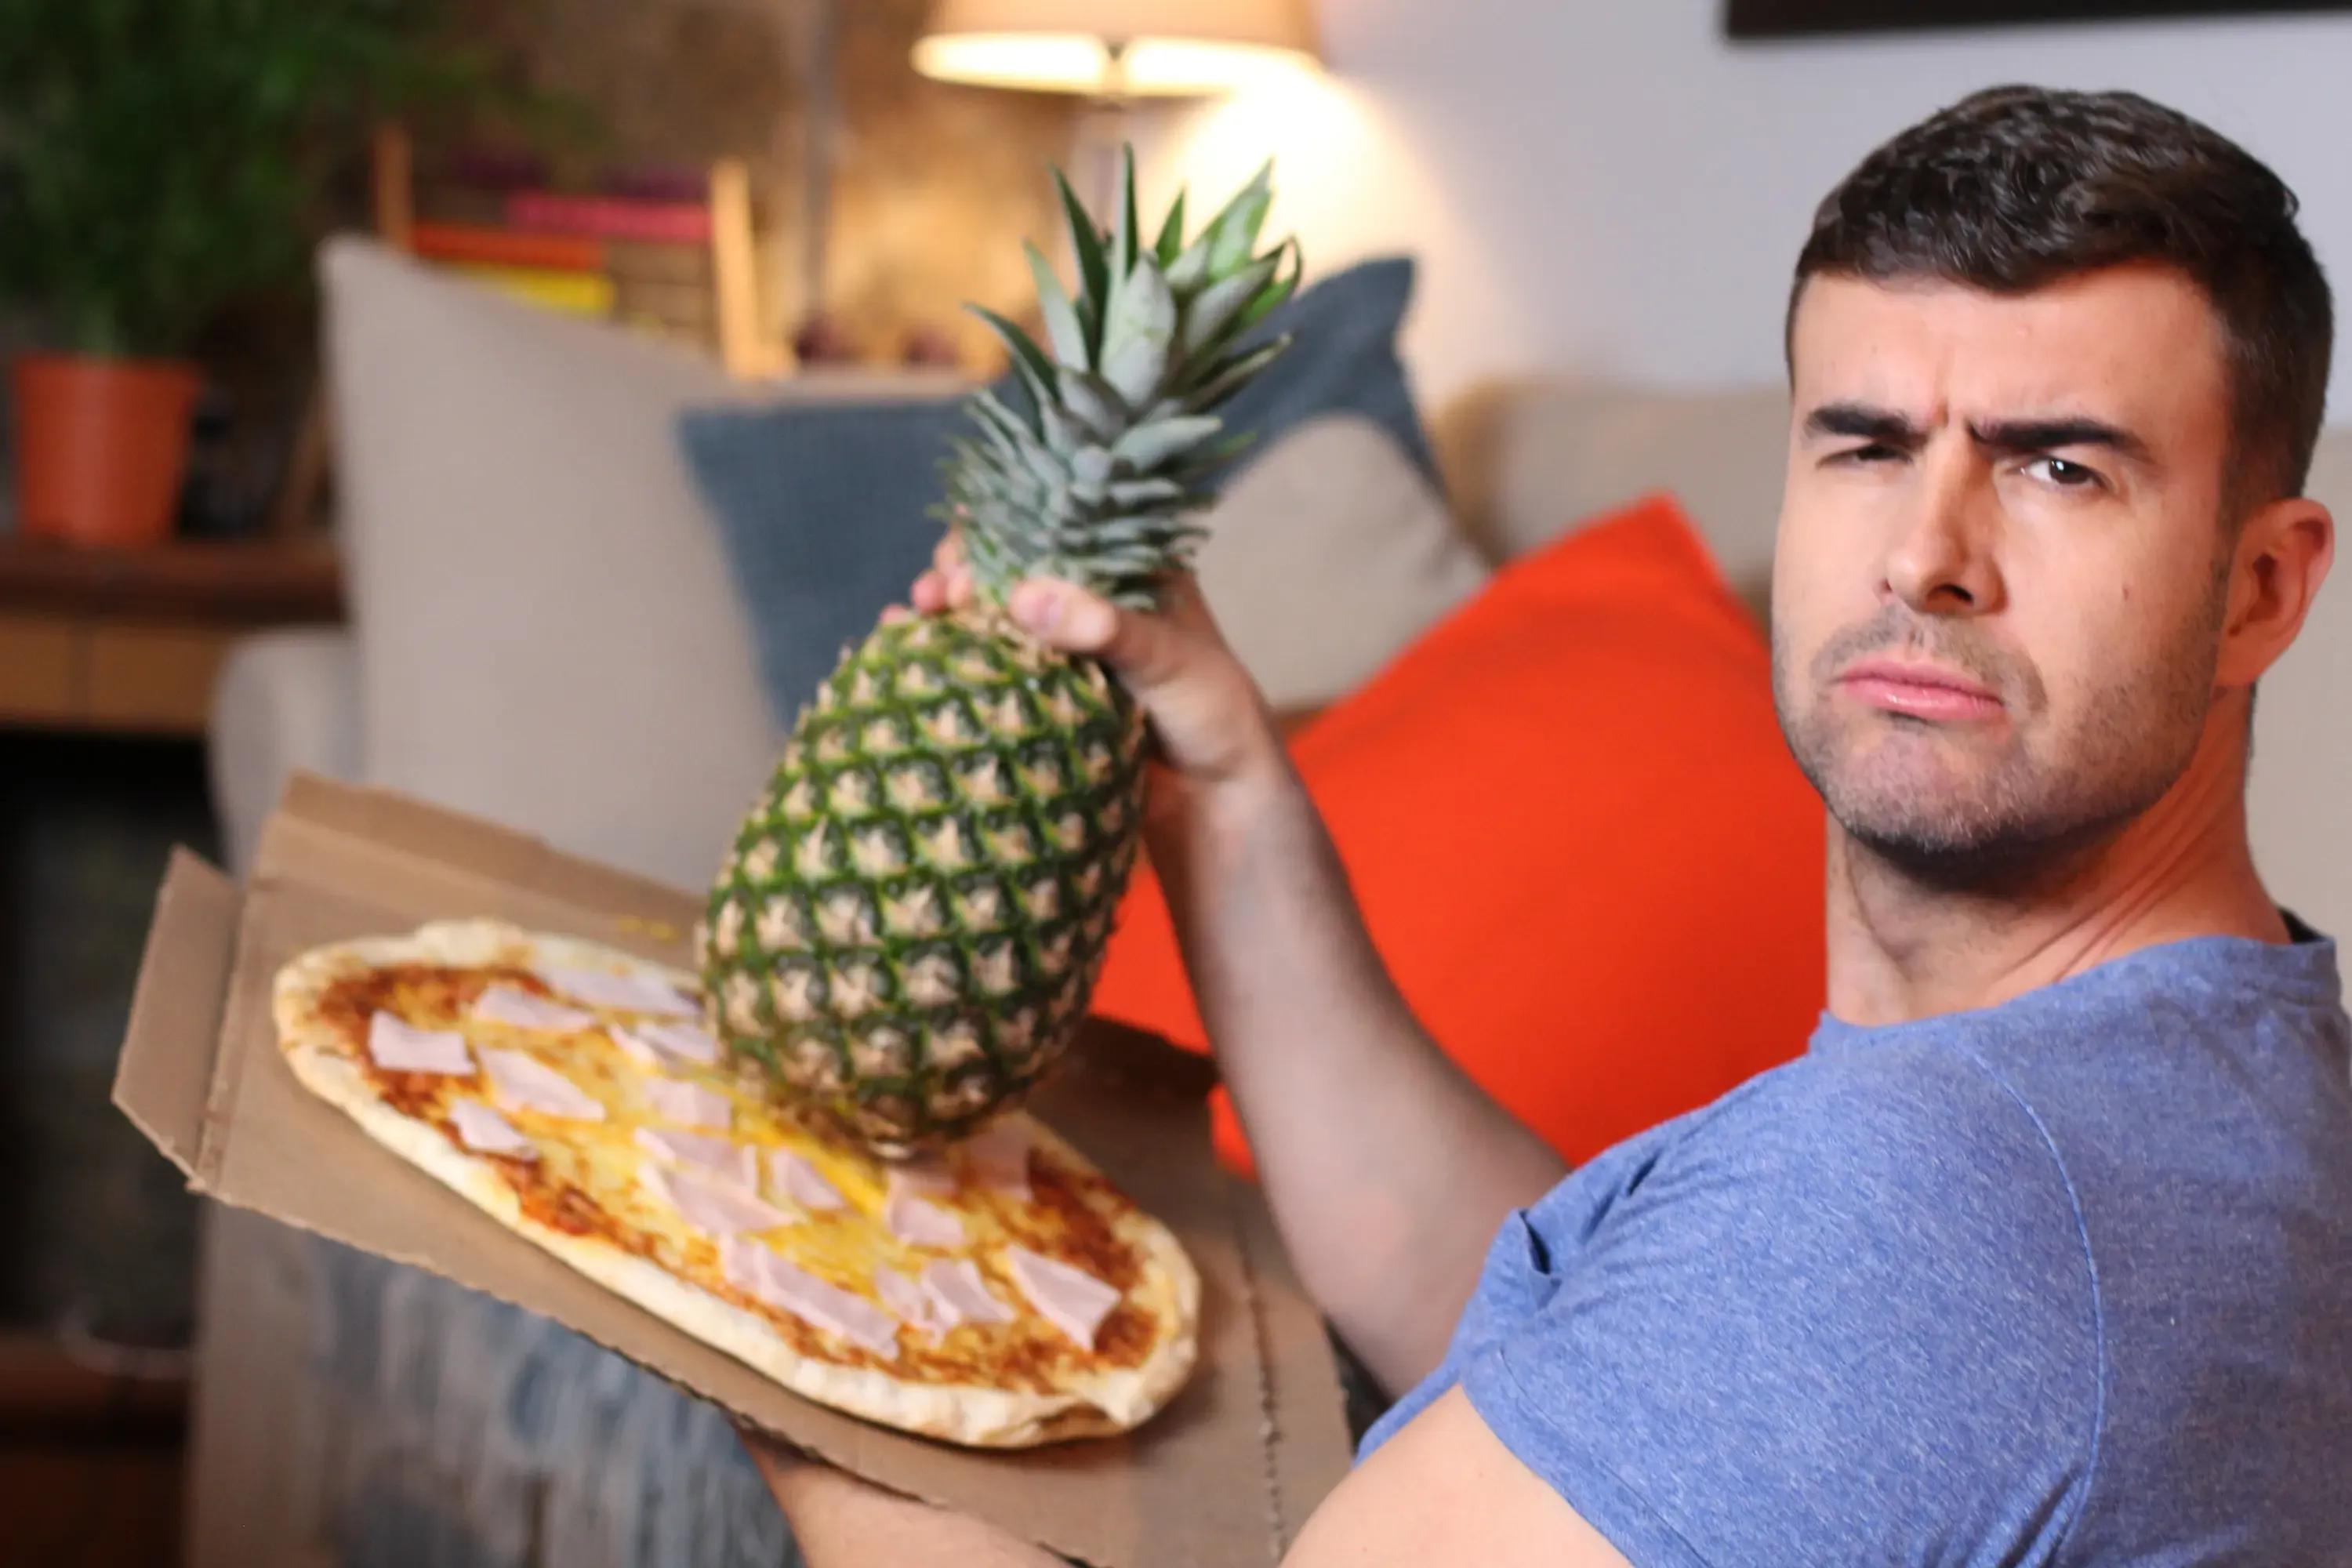 Does pineapple belong on pizza?